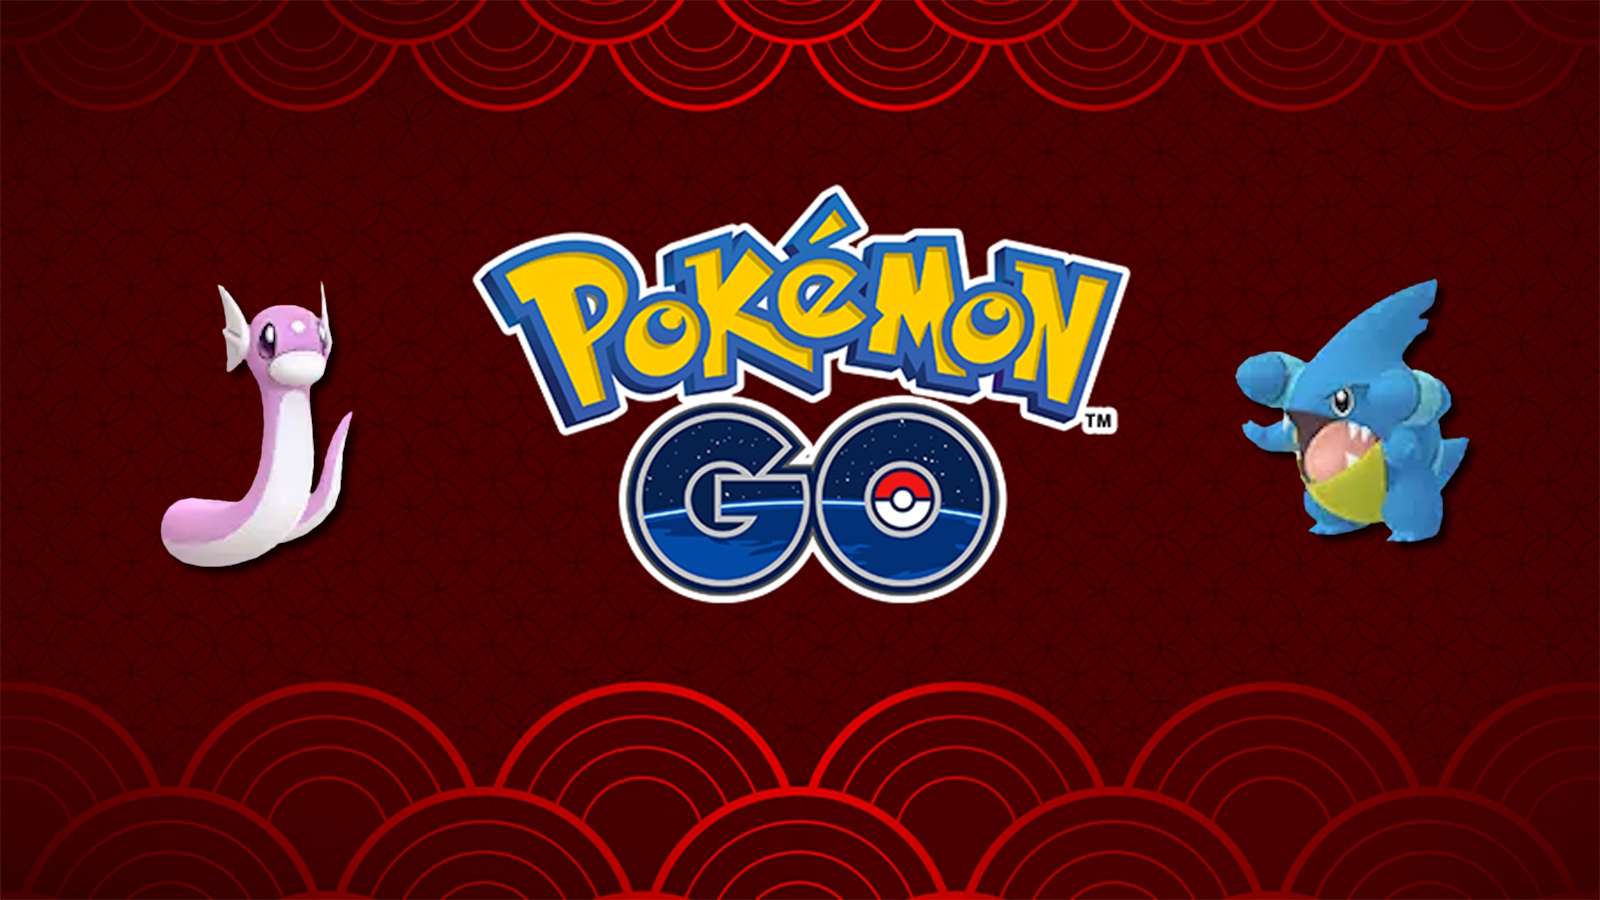 Shiny Dratini and Gible appear in Pokemon Go Lunar New Year event.